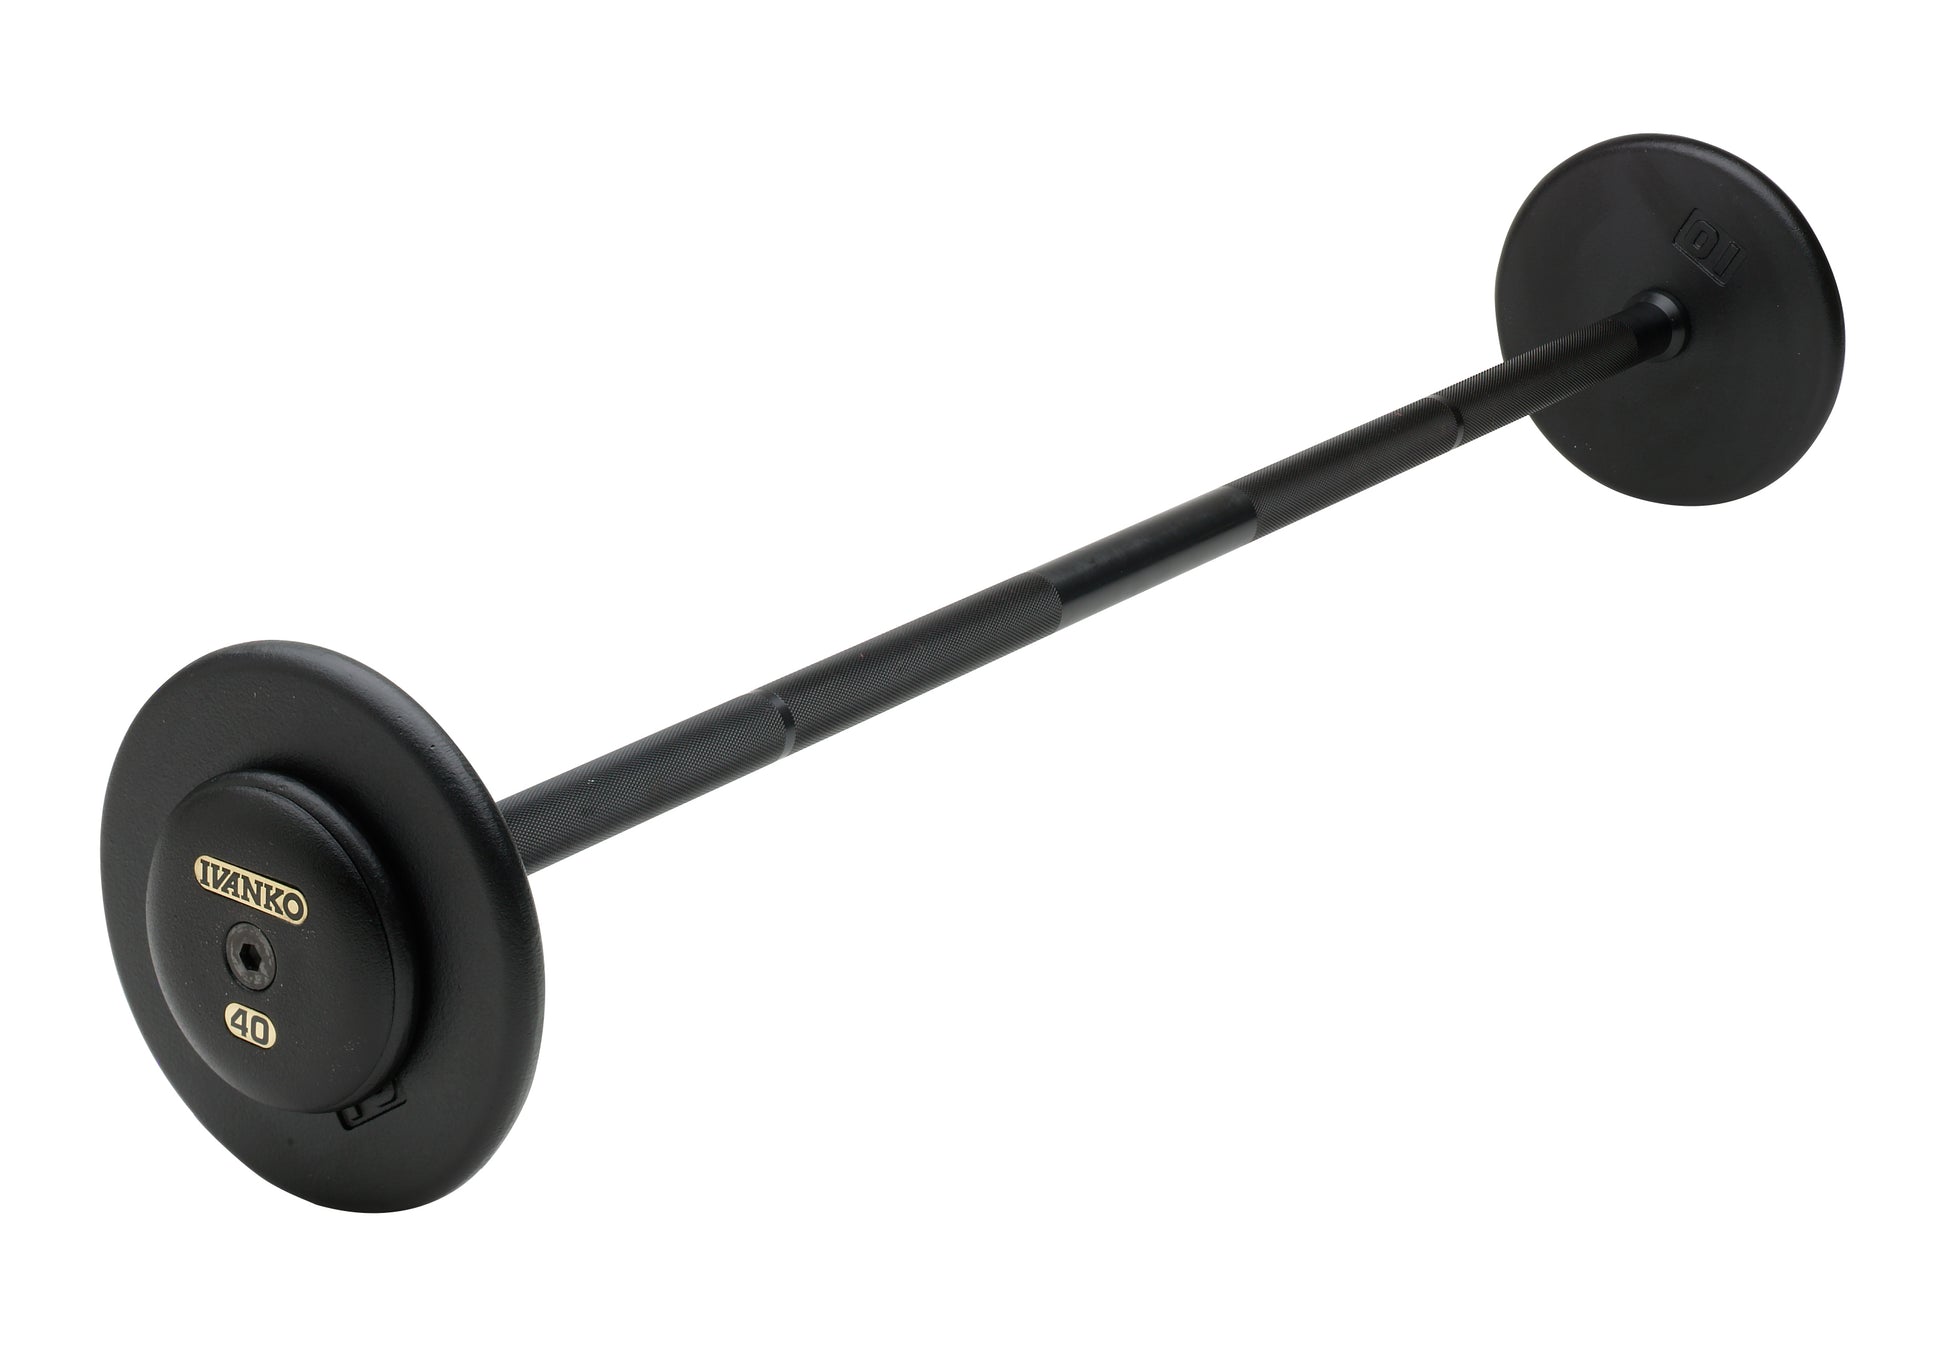 Ivanko straight-bar fixed barbell with black cast iron plates